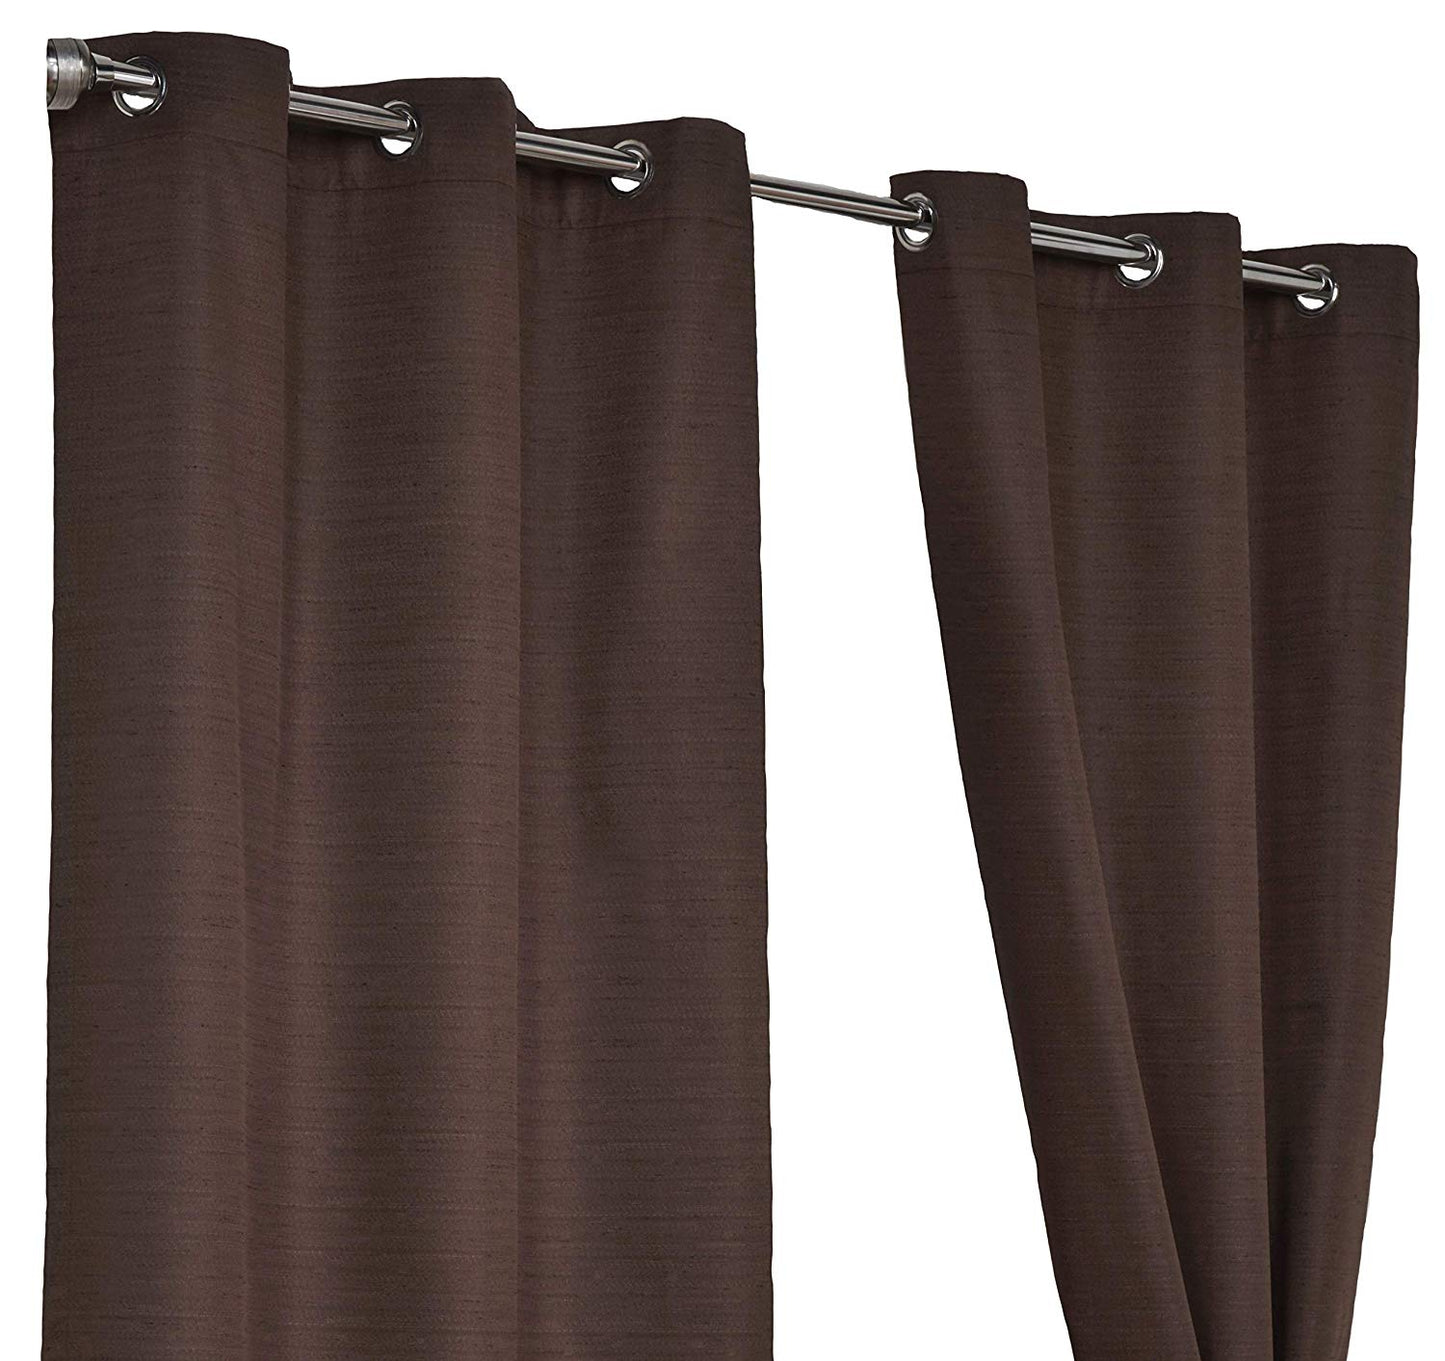 Lunar Chocolate Brown 90" x 72" Eyelet Unlined Ready Made Curtains